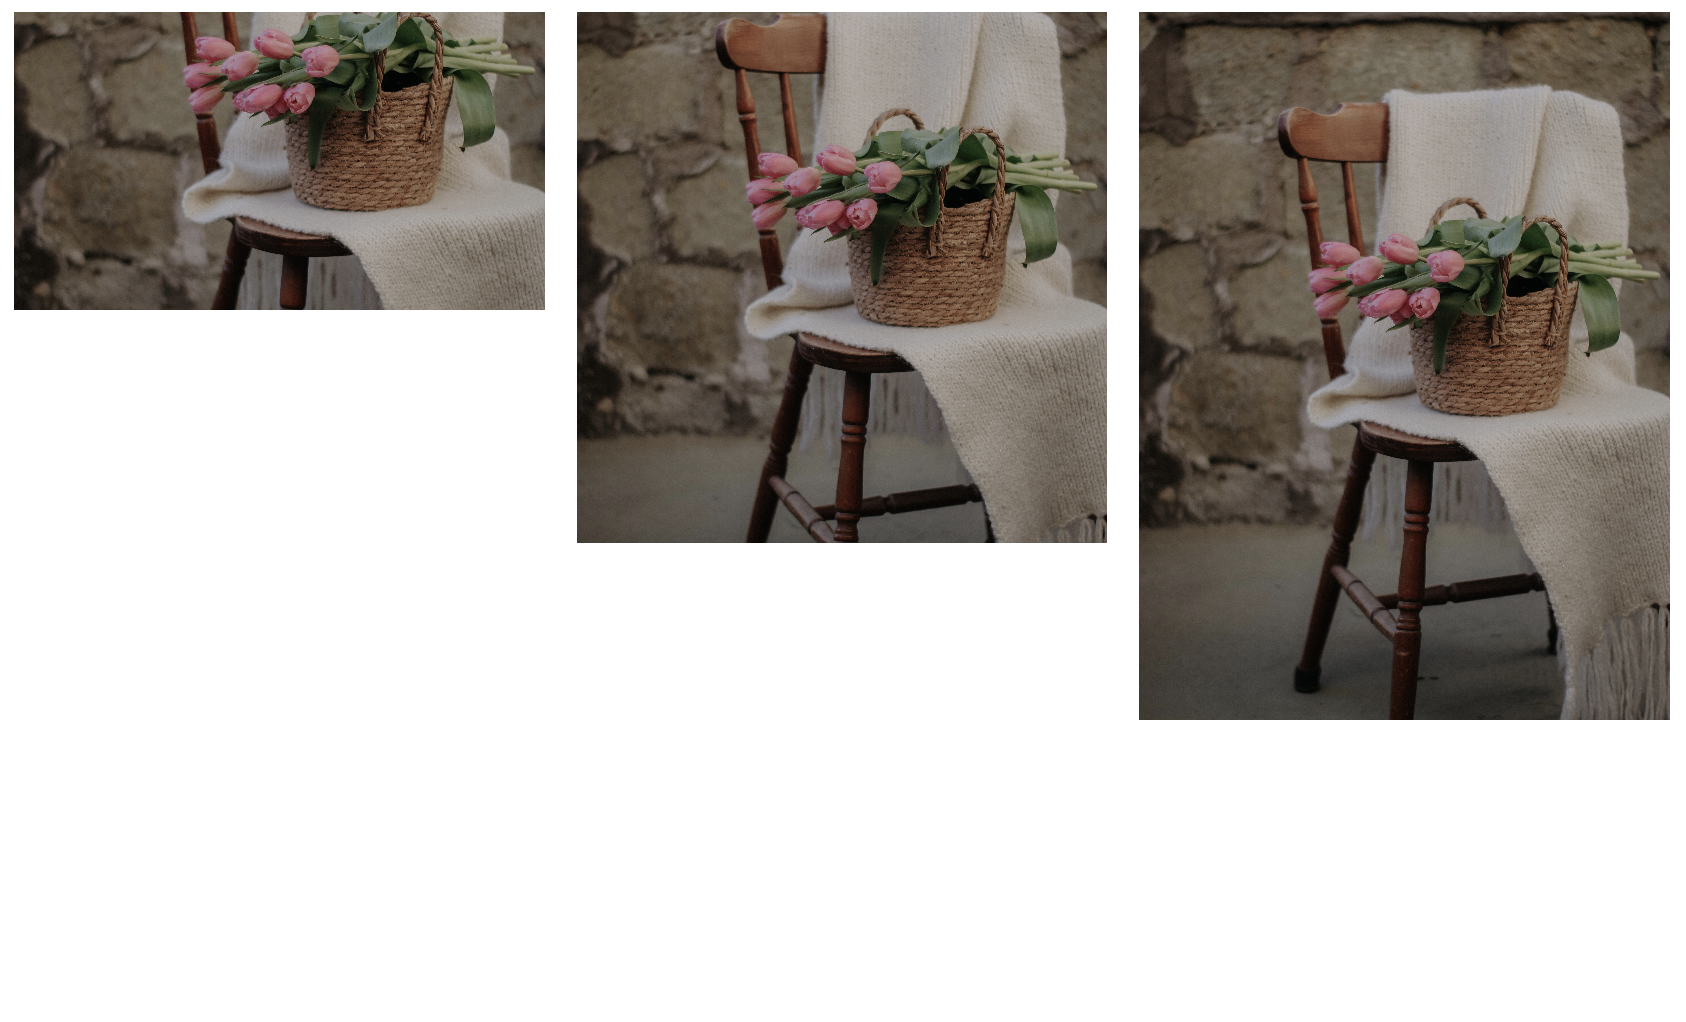 Three identical images, as before with varying aspect ratios, but now each is sized correctly within its bounds. The flowers in each image are displayed at a different spot in the image though.